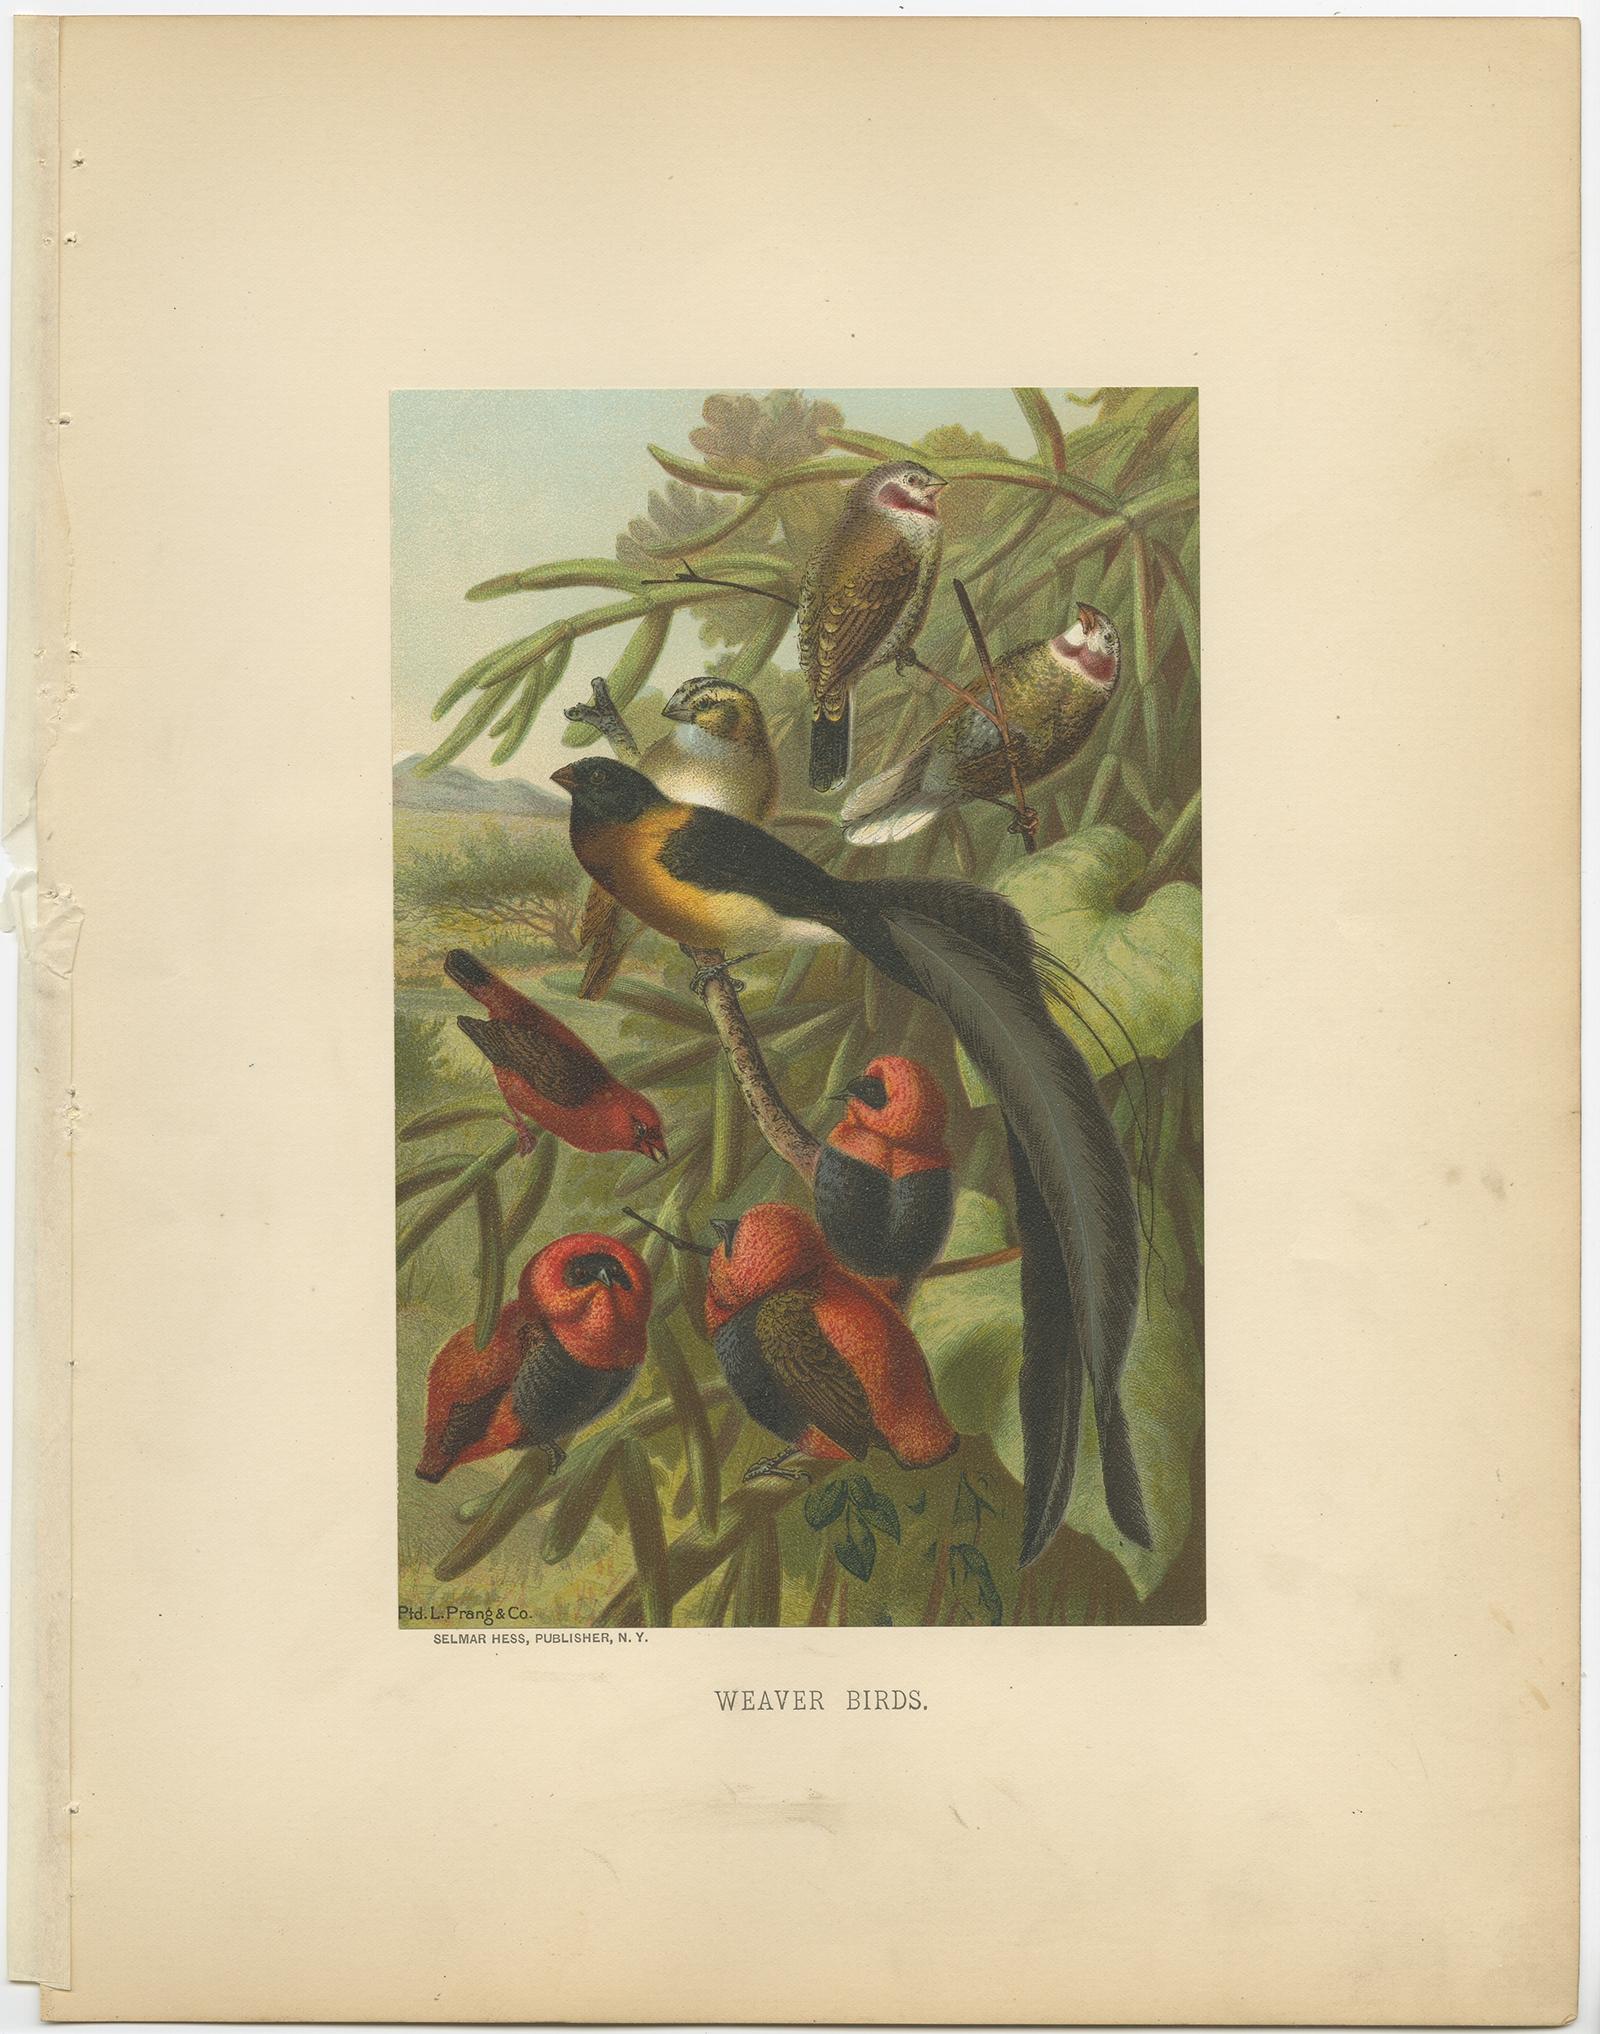 Antique bird print titled 'Weaver Birds'. Old bird print depicting weaver birds. This chromolithograph originates from the natural history set 'Animate Creation' published in 1898 by Selmar Hess in New York. 

Artists and Engravers: Louis Prang